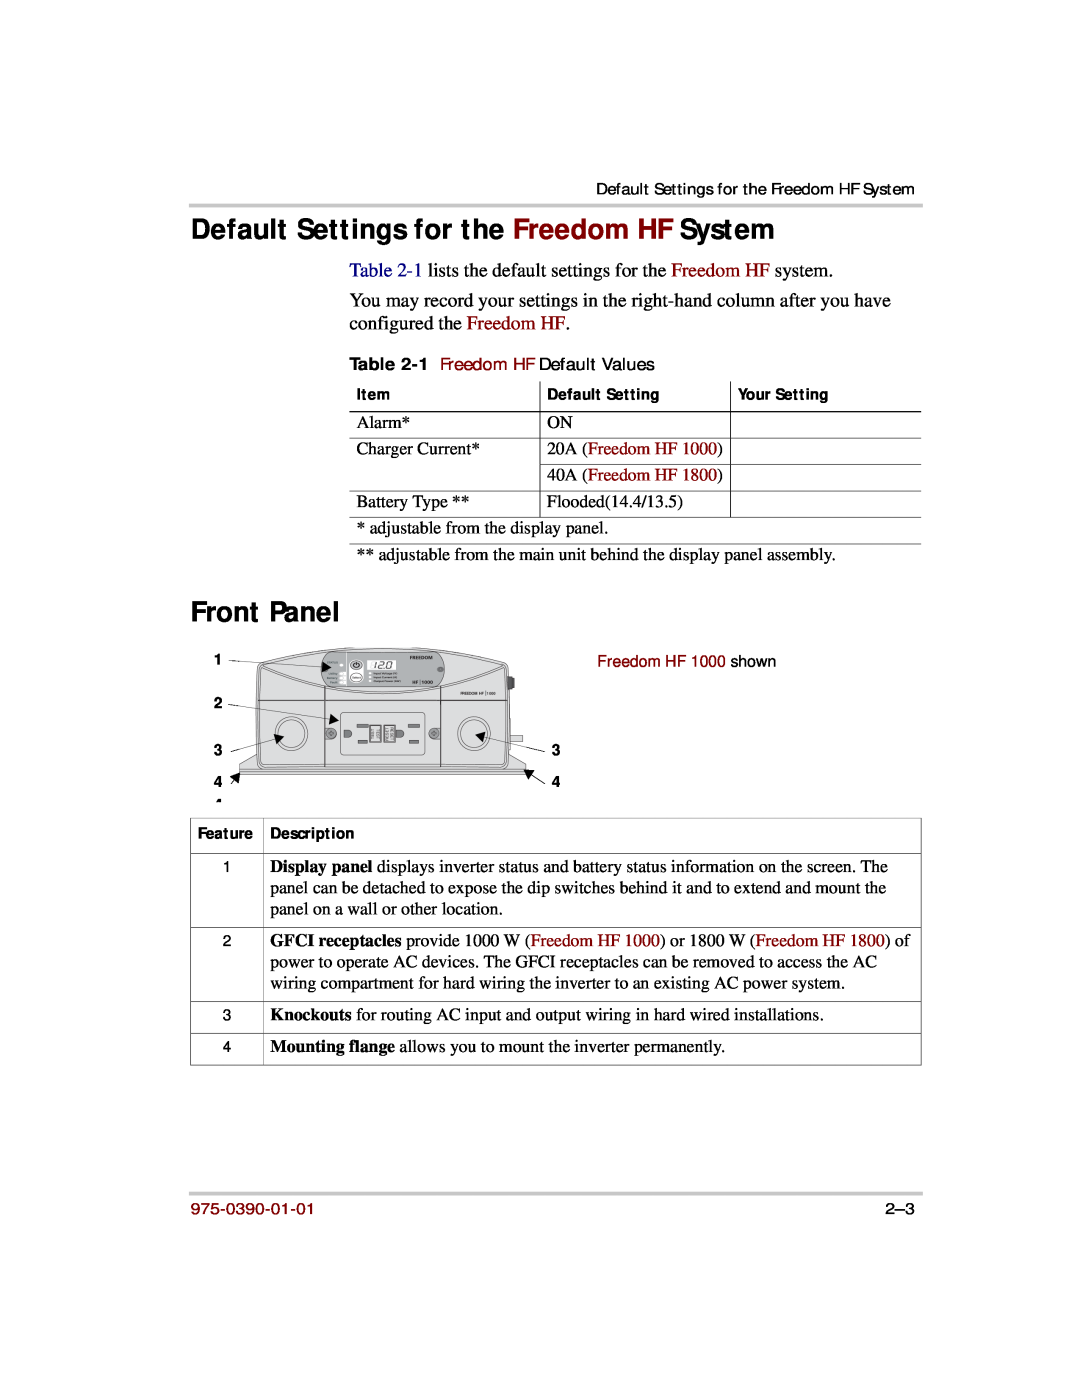 Xantrex Technology HF 1800, HF 1000 Default Settings for the Freedom HF System, Front Panel, 1 Freedom HF Default Values 